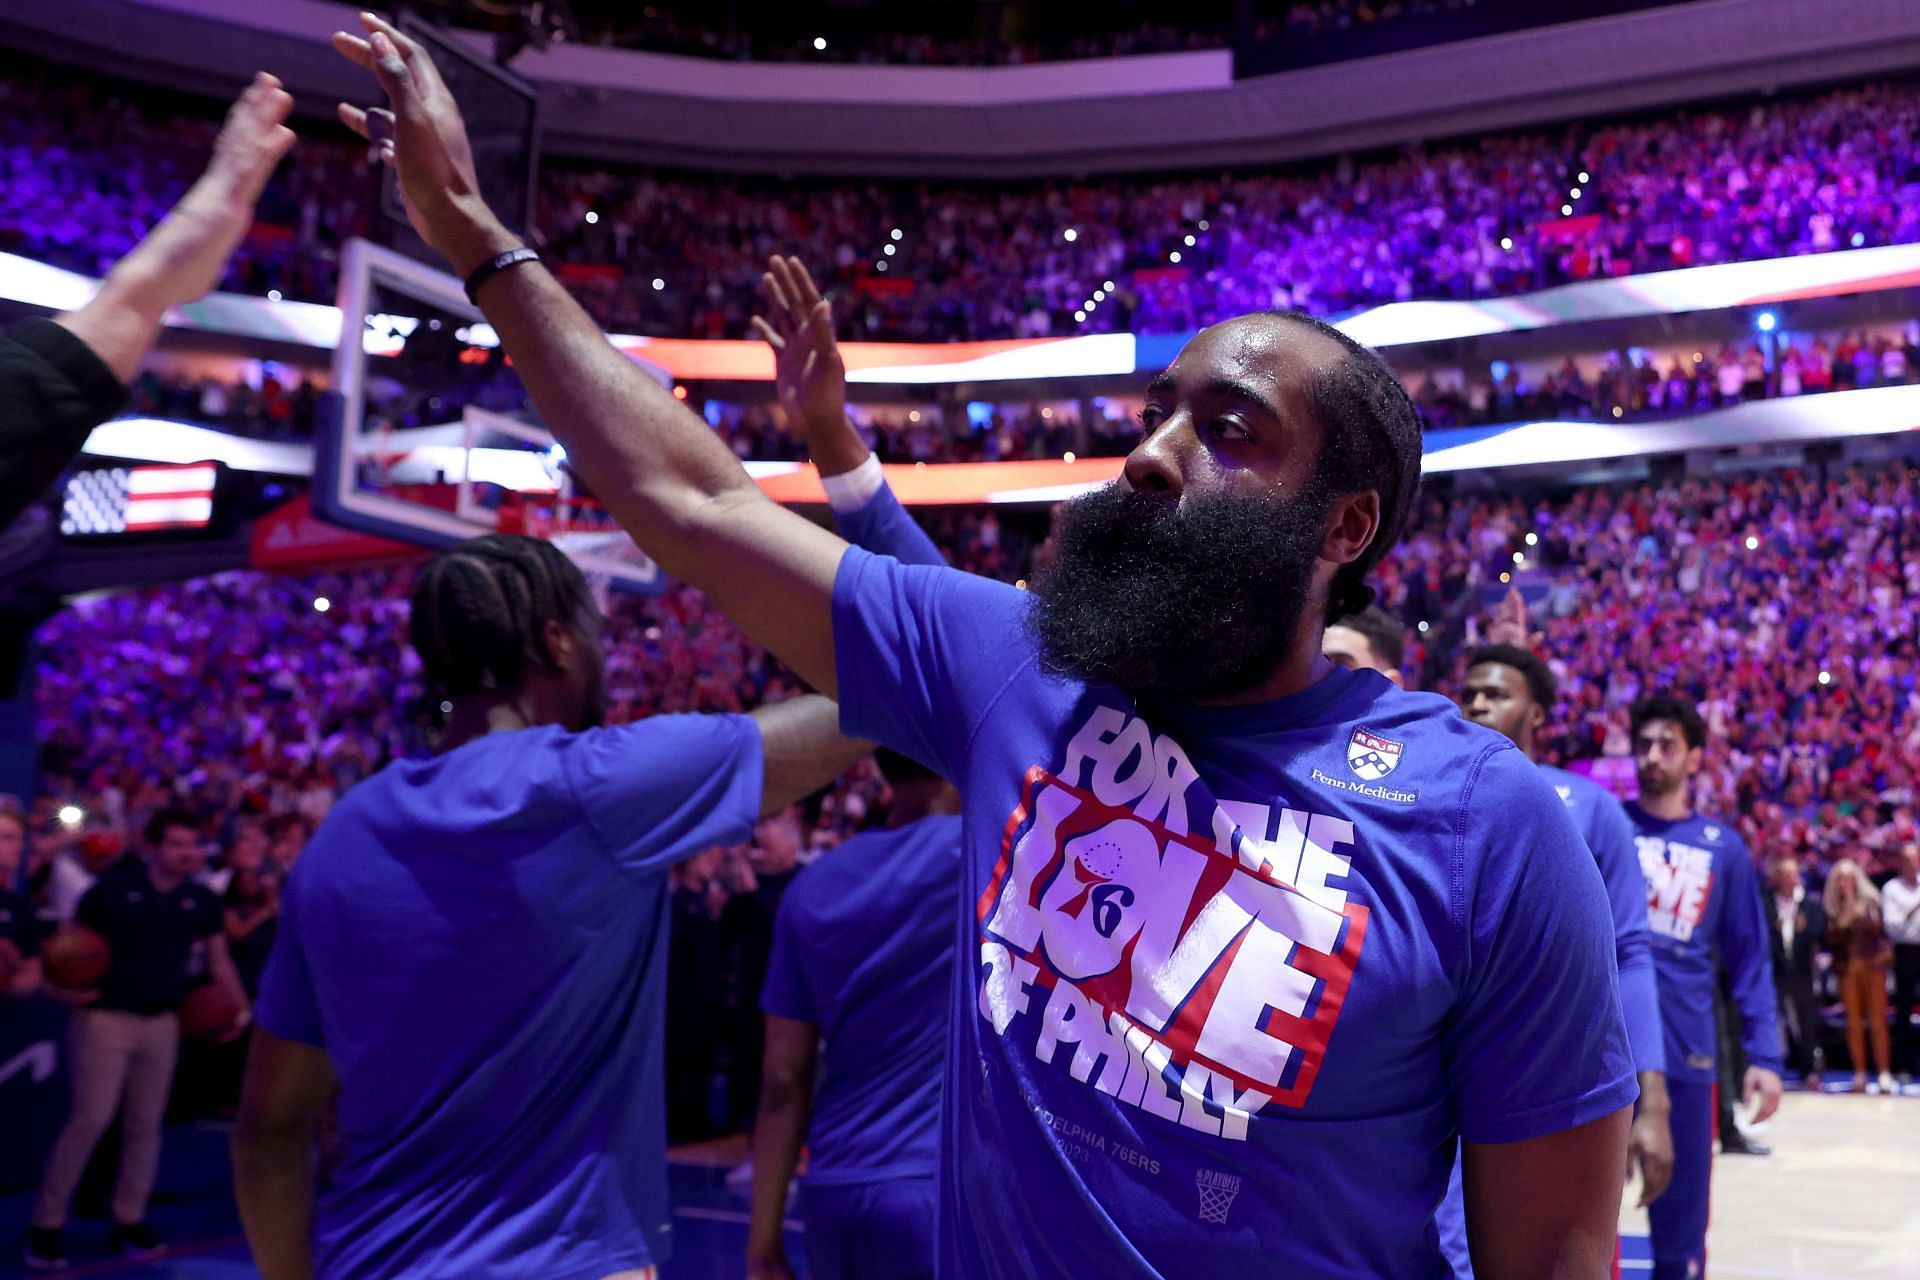 James Harden's tenure as a Sixer appears to be coming to an end